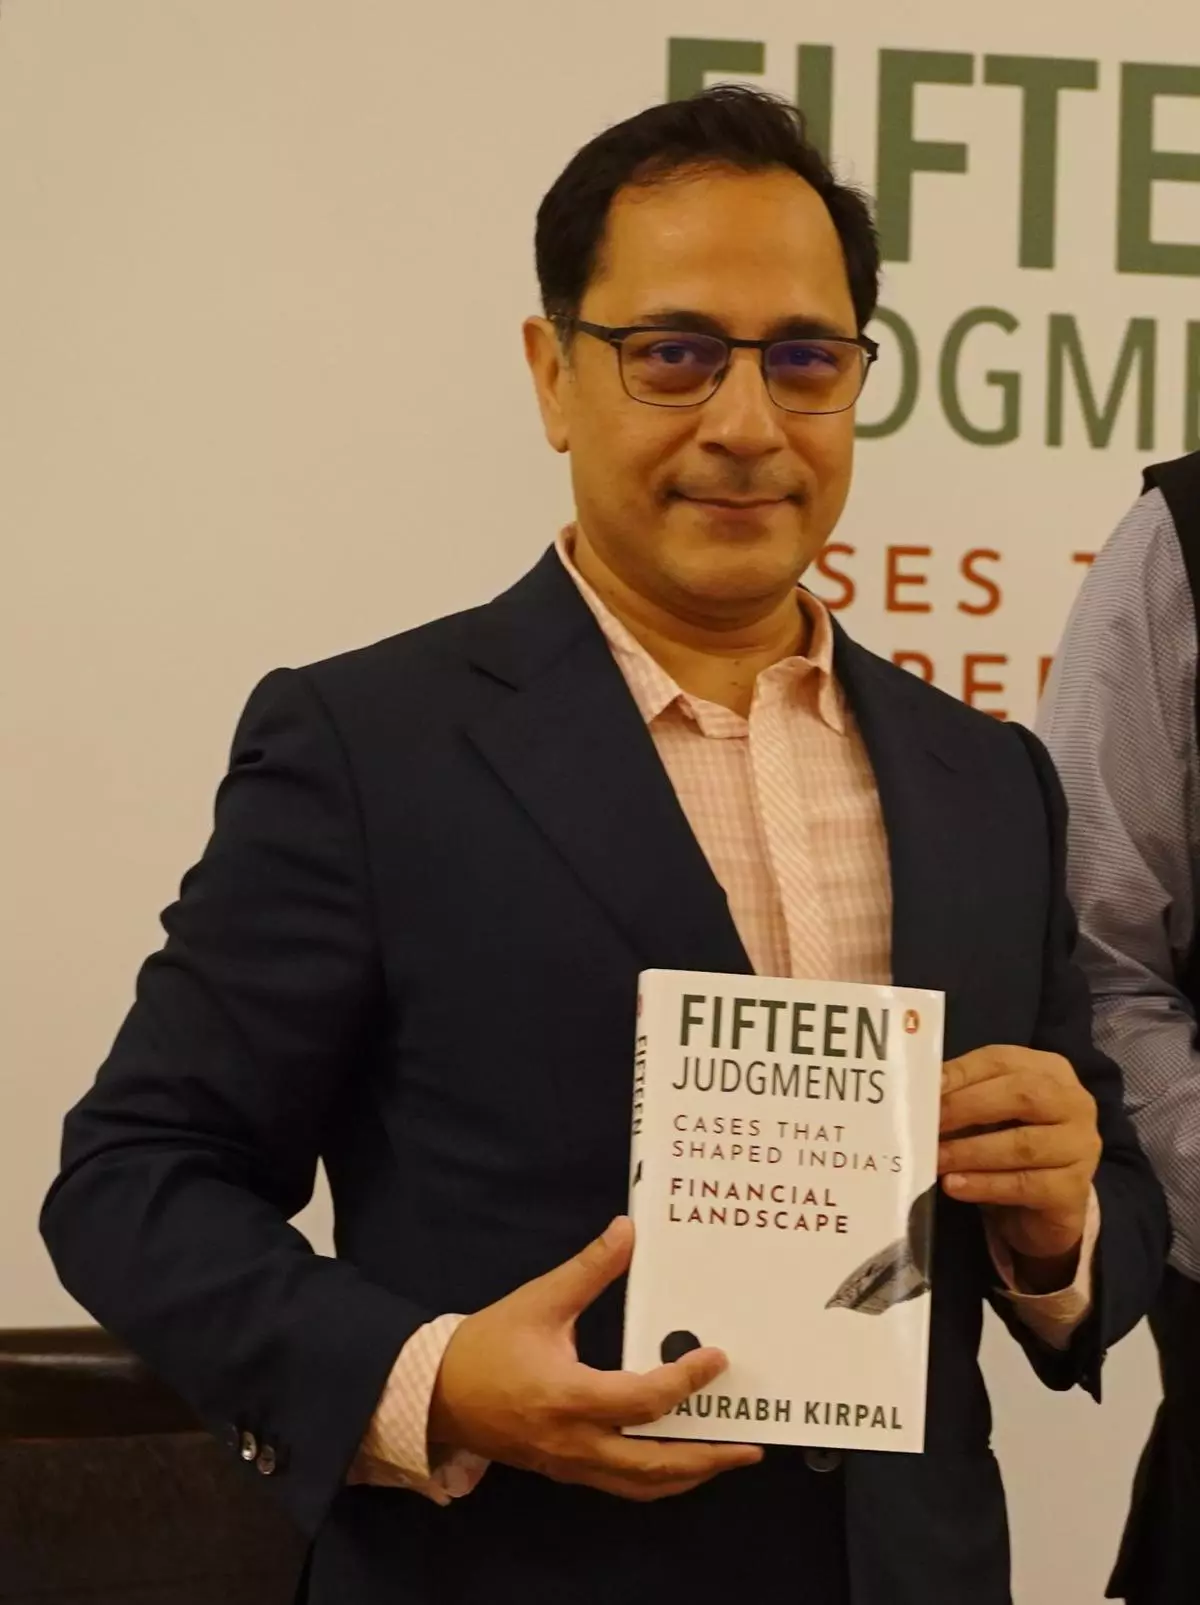 Supreme Court lawyer Saurabh Kirpal with his book ‘Fifteen Judgments: Cases that Shaped India’s Financial Landscape’